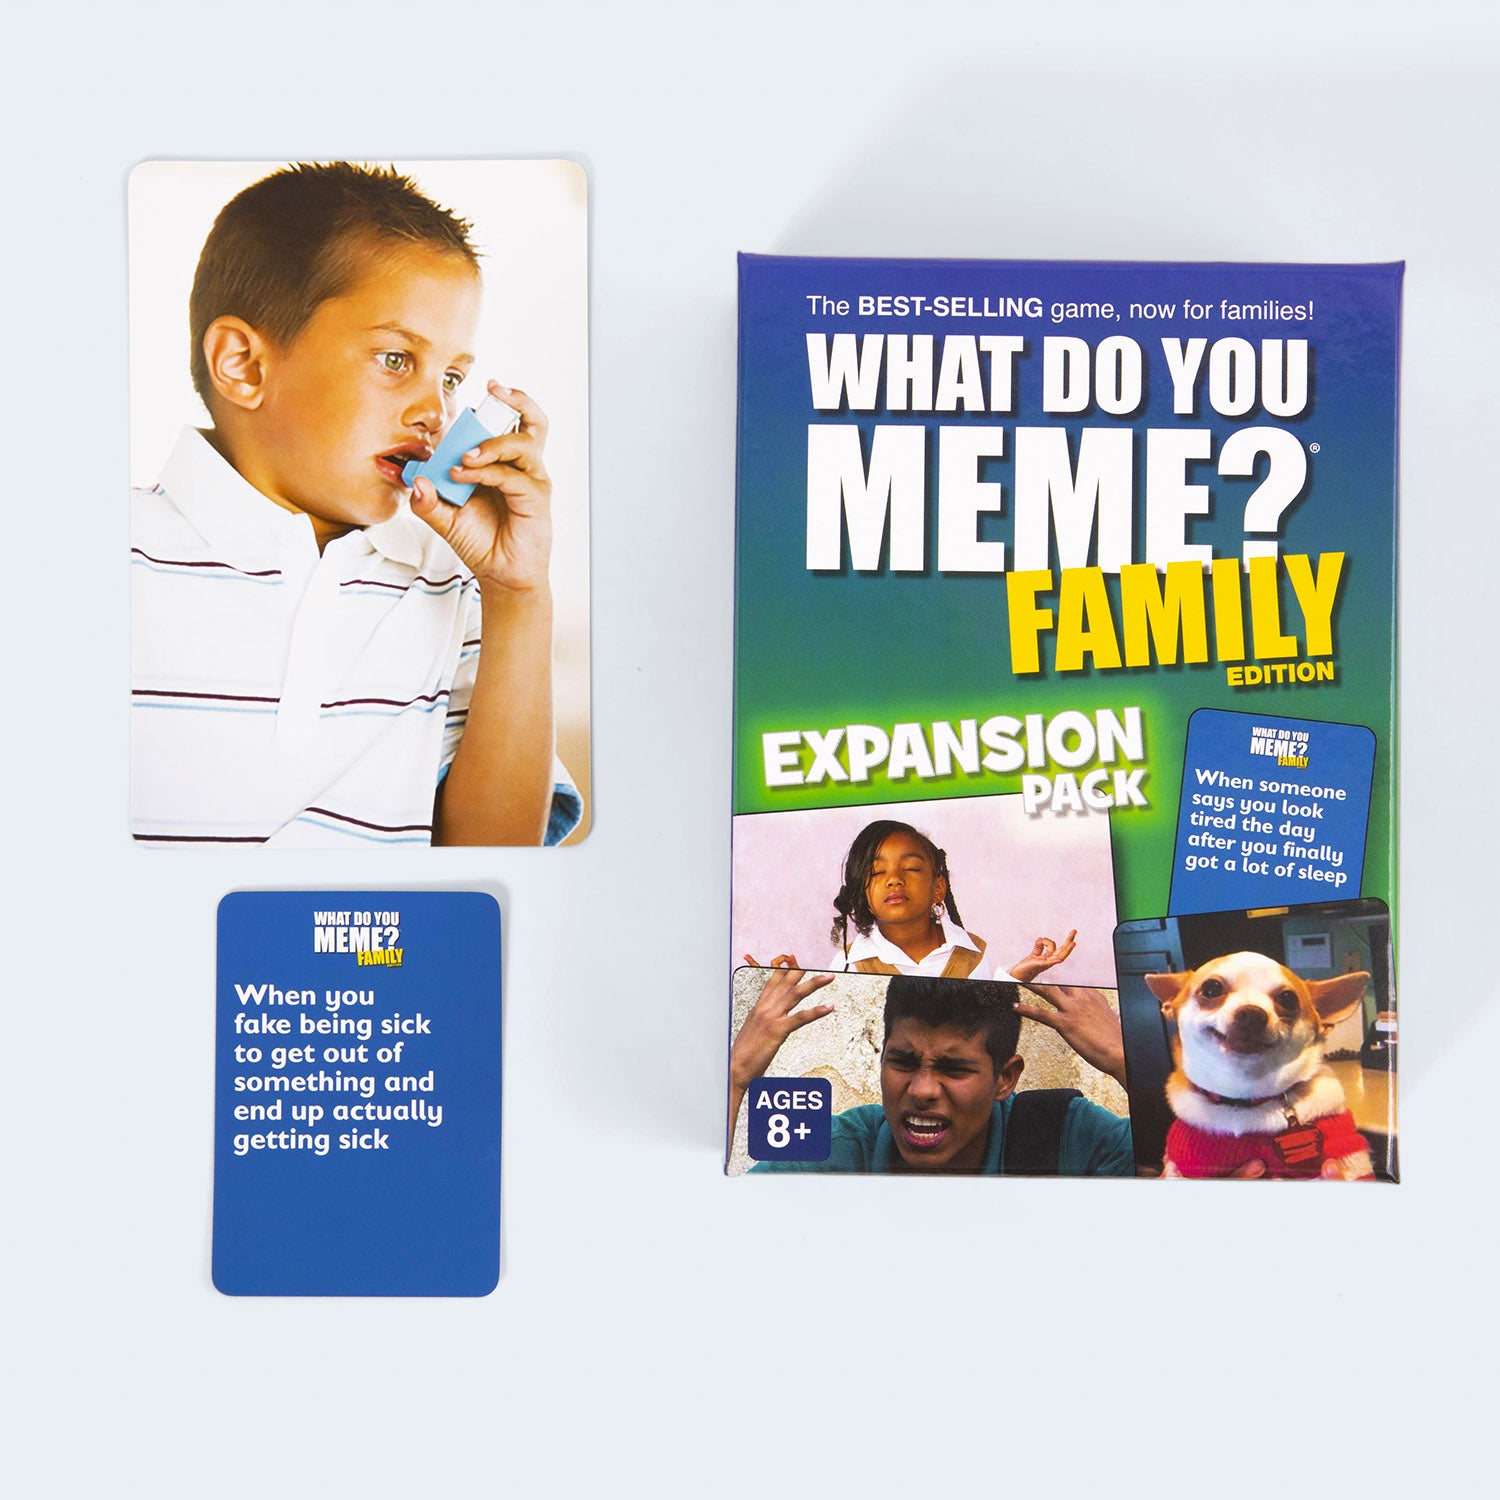 Expansion Pack for What Do You Meme?® Family Edition Card Game